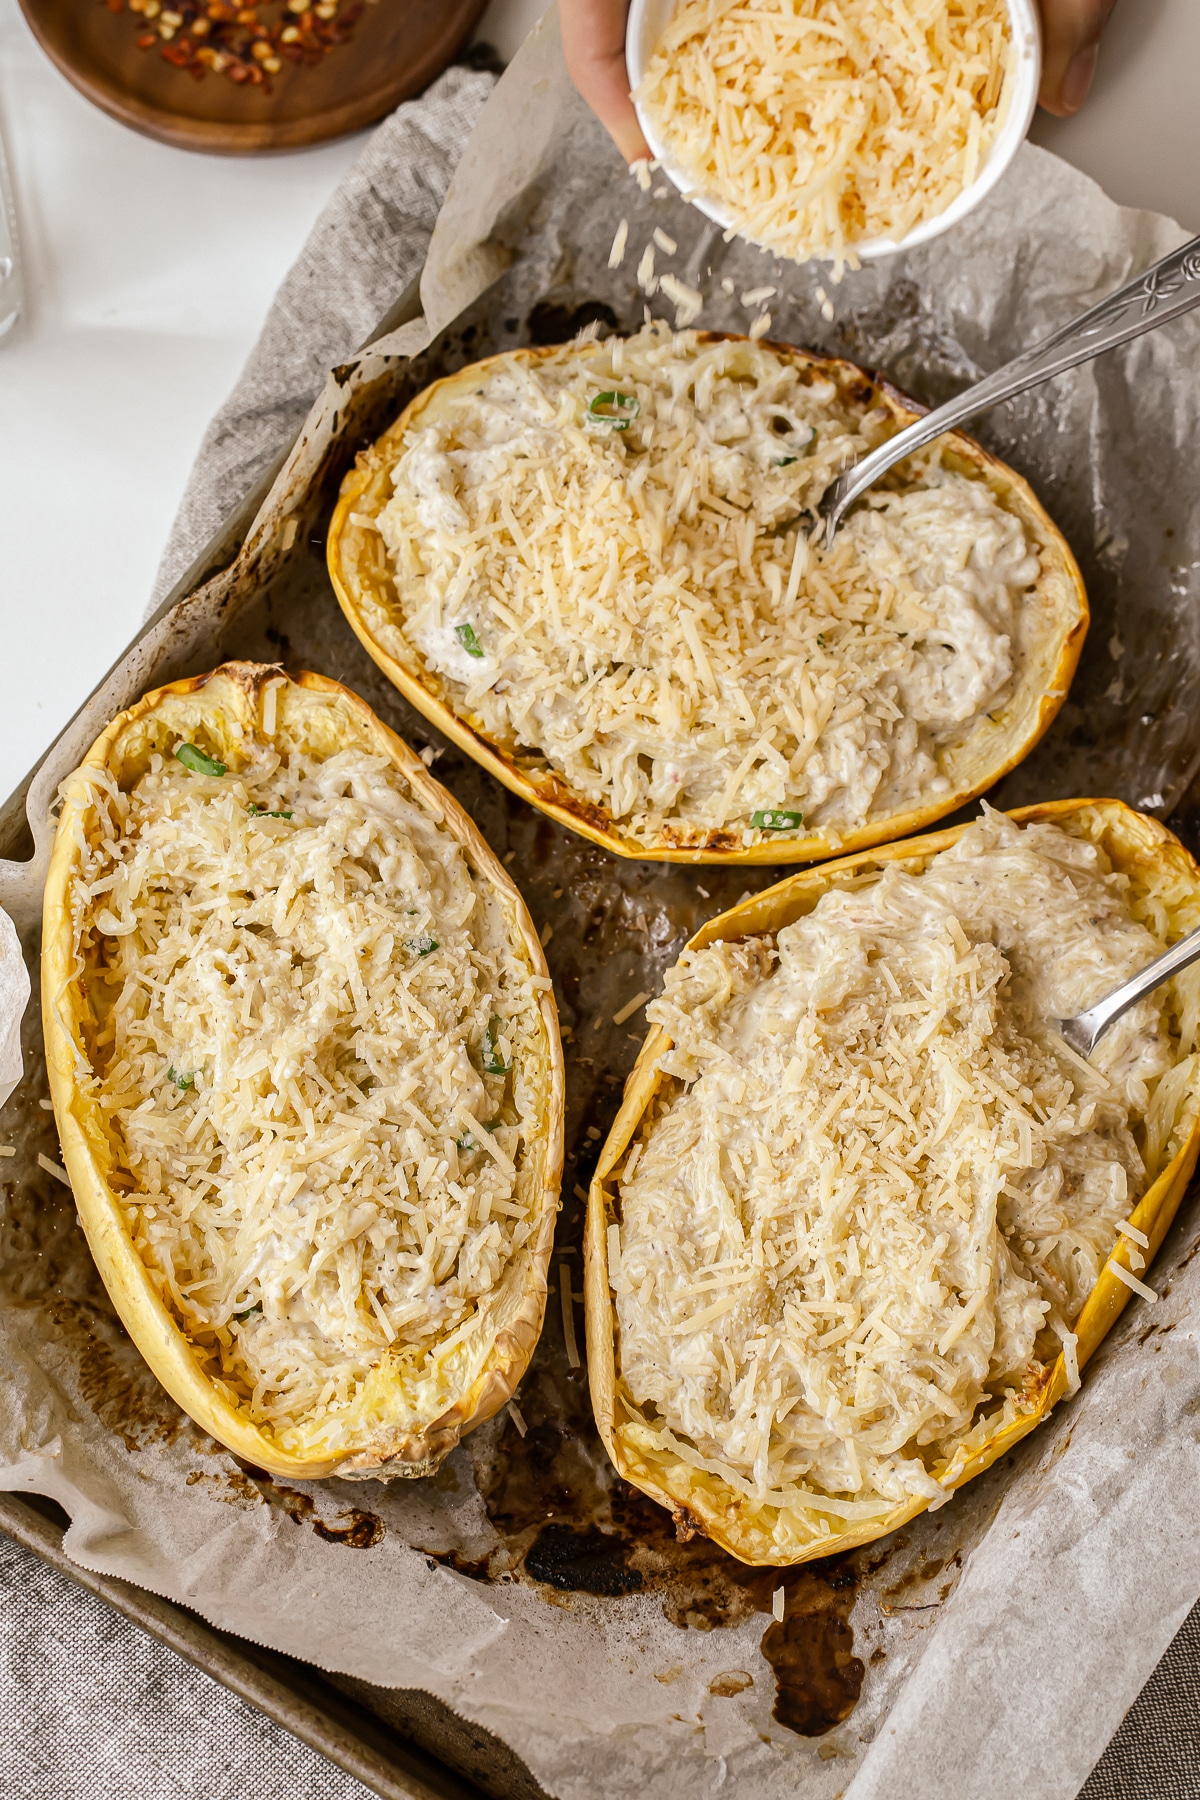 Picture of three halves of Alfredo spaghetti squash with forks in them on a parchment lined baking tray with a hand sprinkling Parmesan cheese on top.